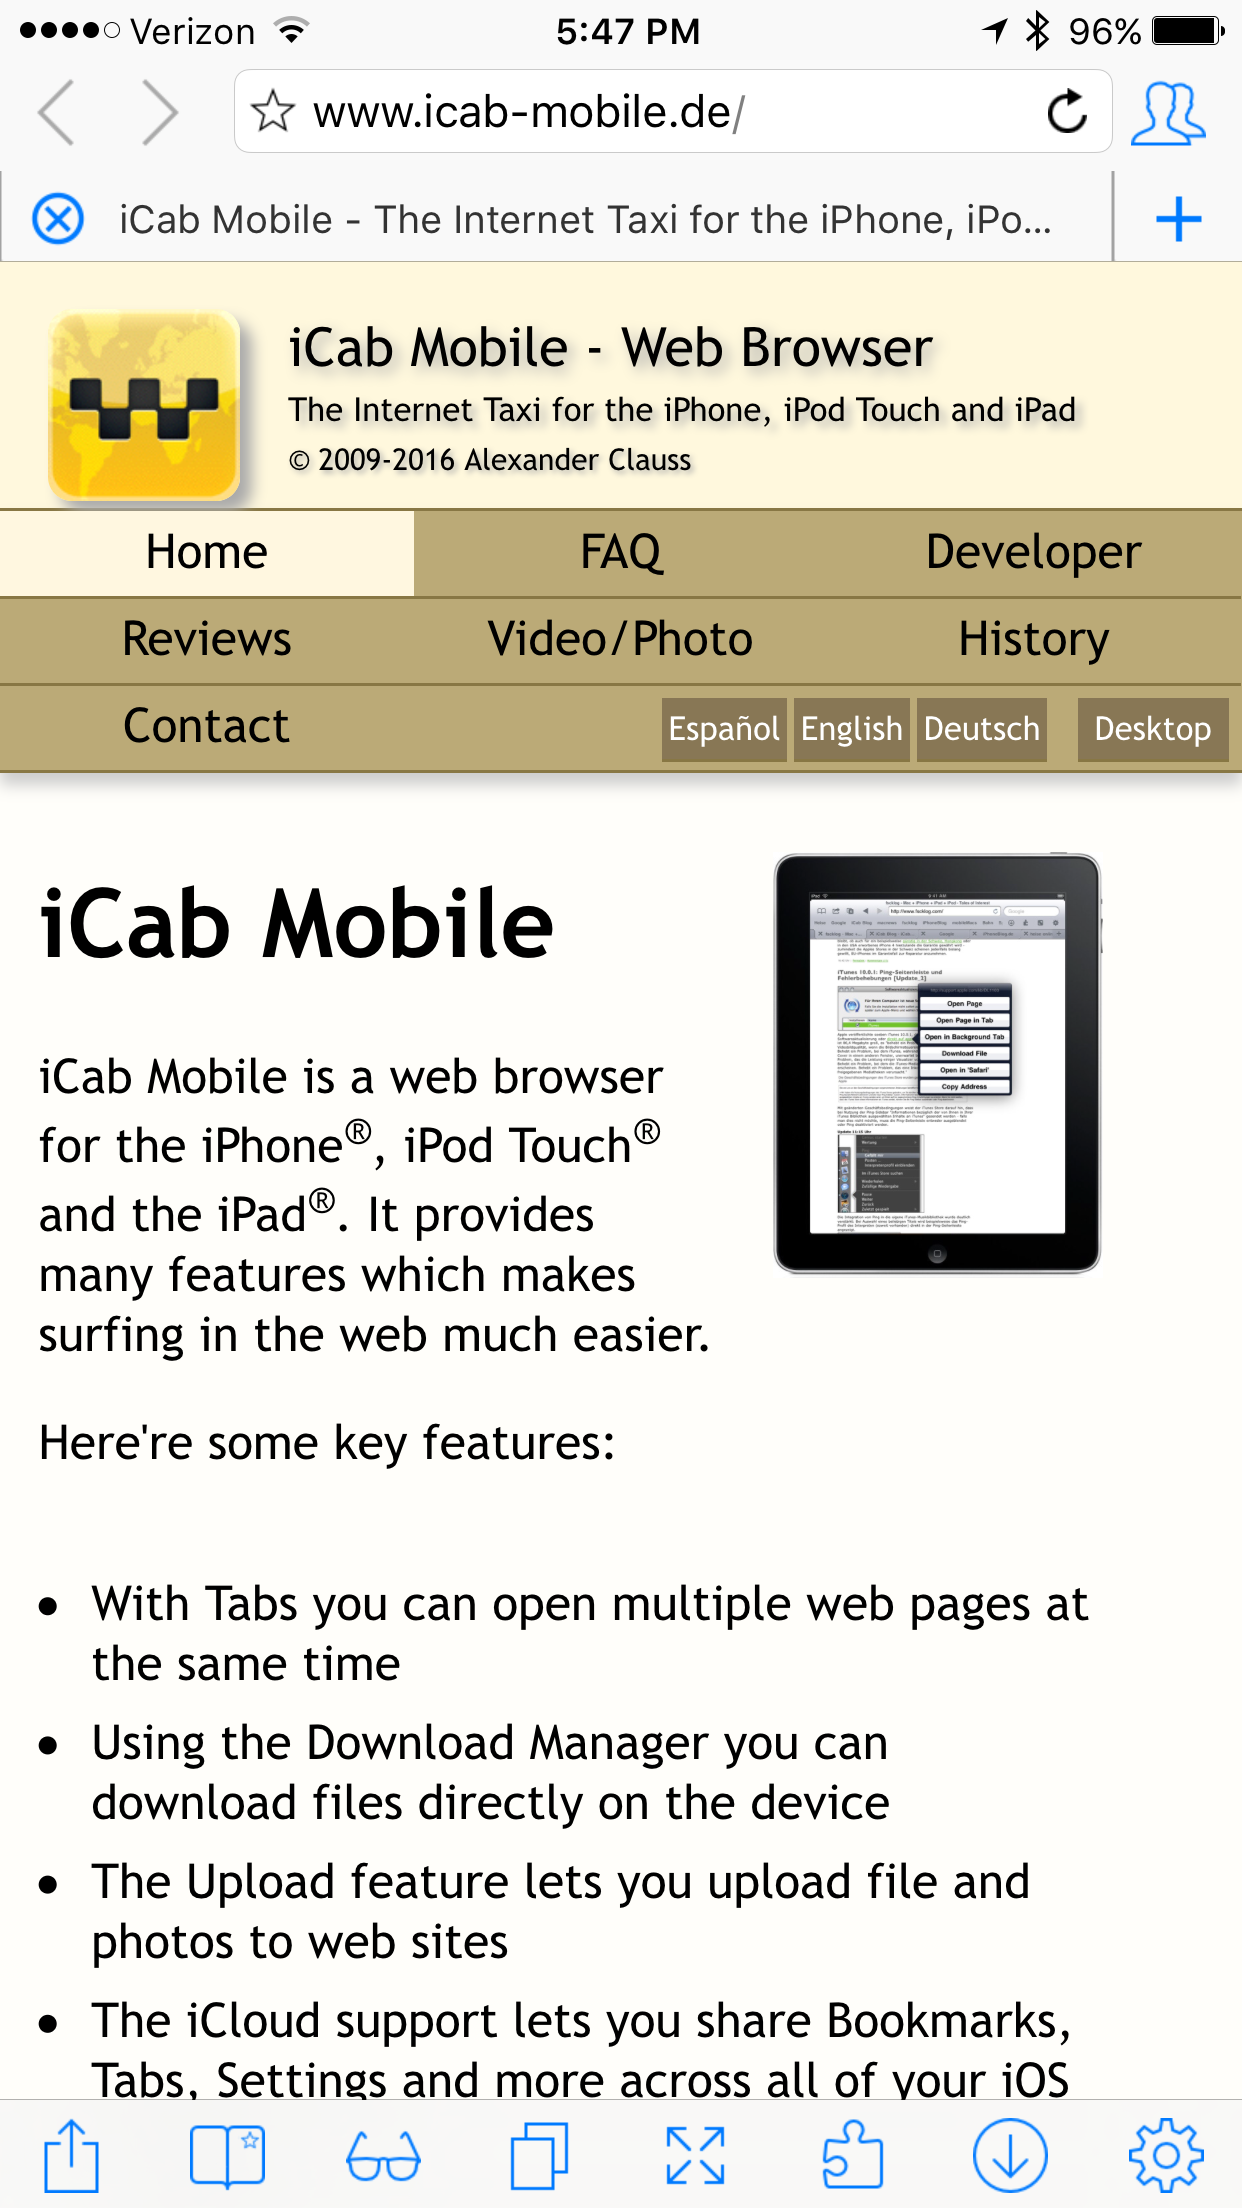 ⓔ iCab Mobile is my new favorite browser on my iPhone